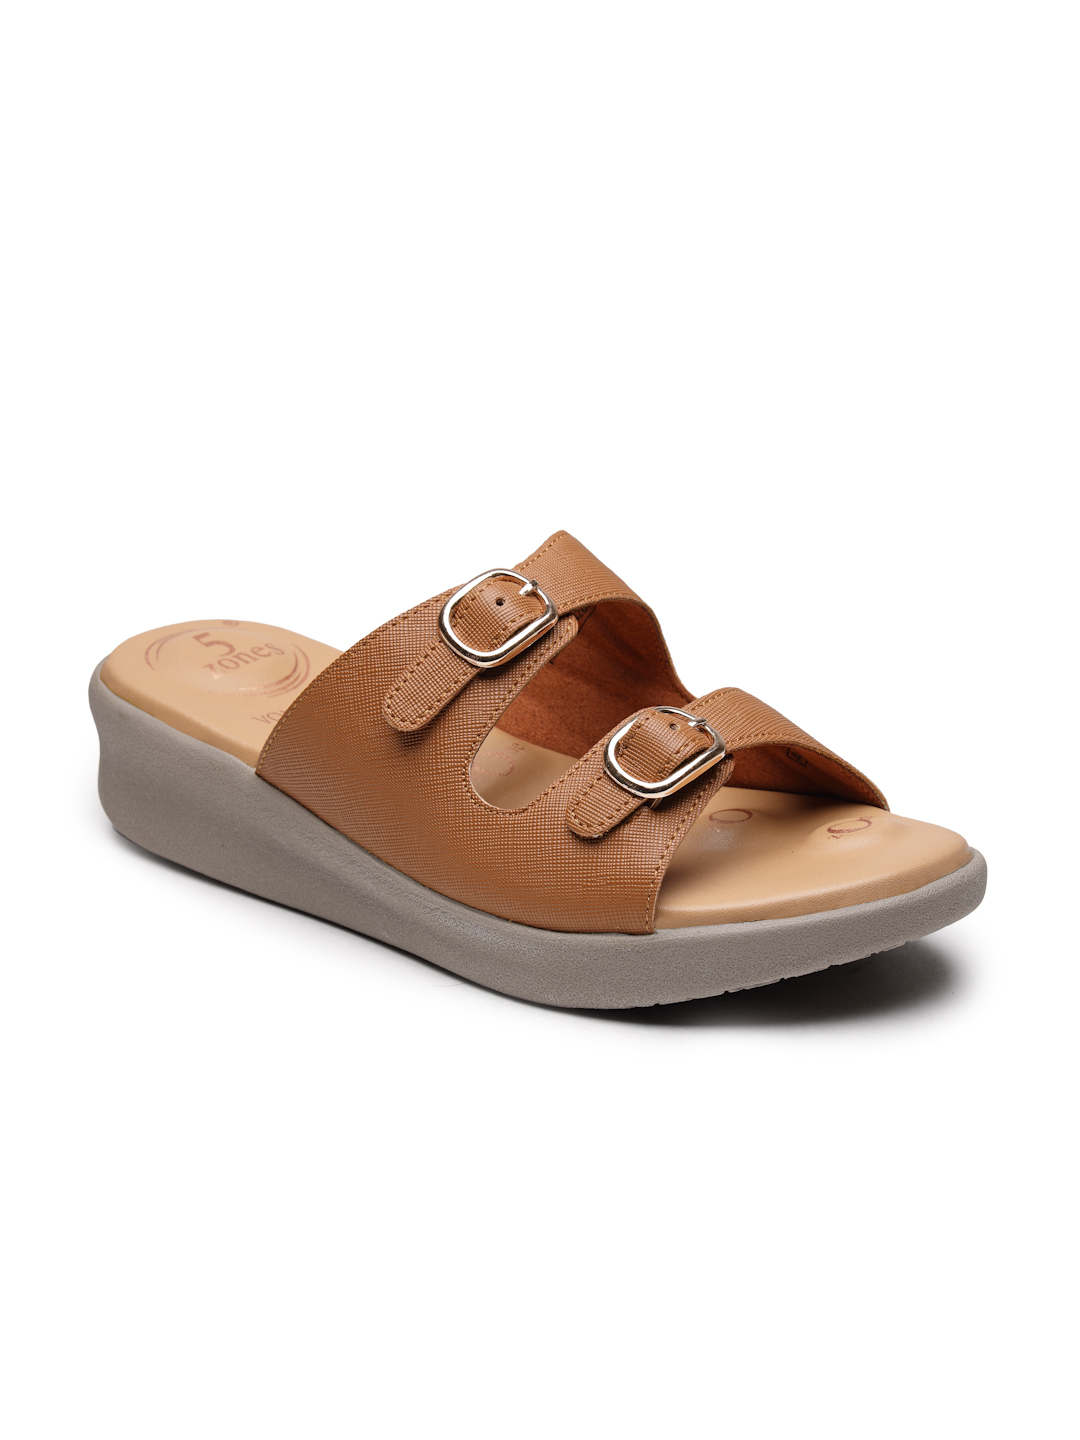 VON WELLX GERMANY comfort women's tan casual slippers FLORENCE